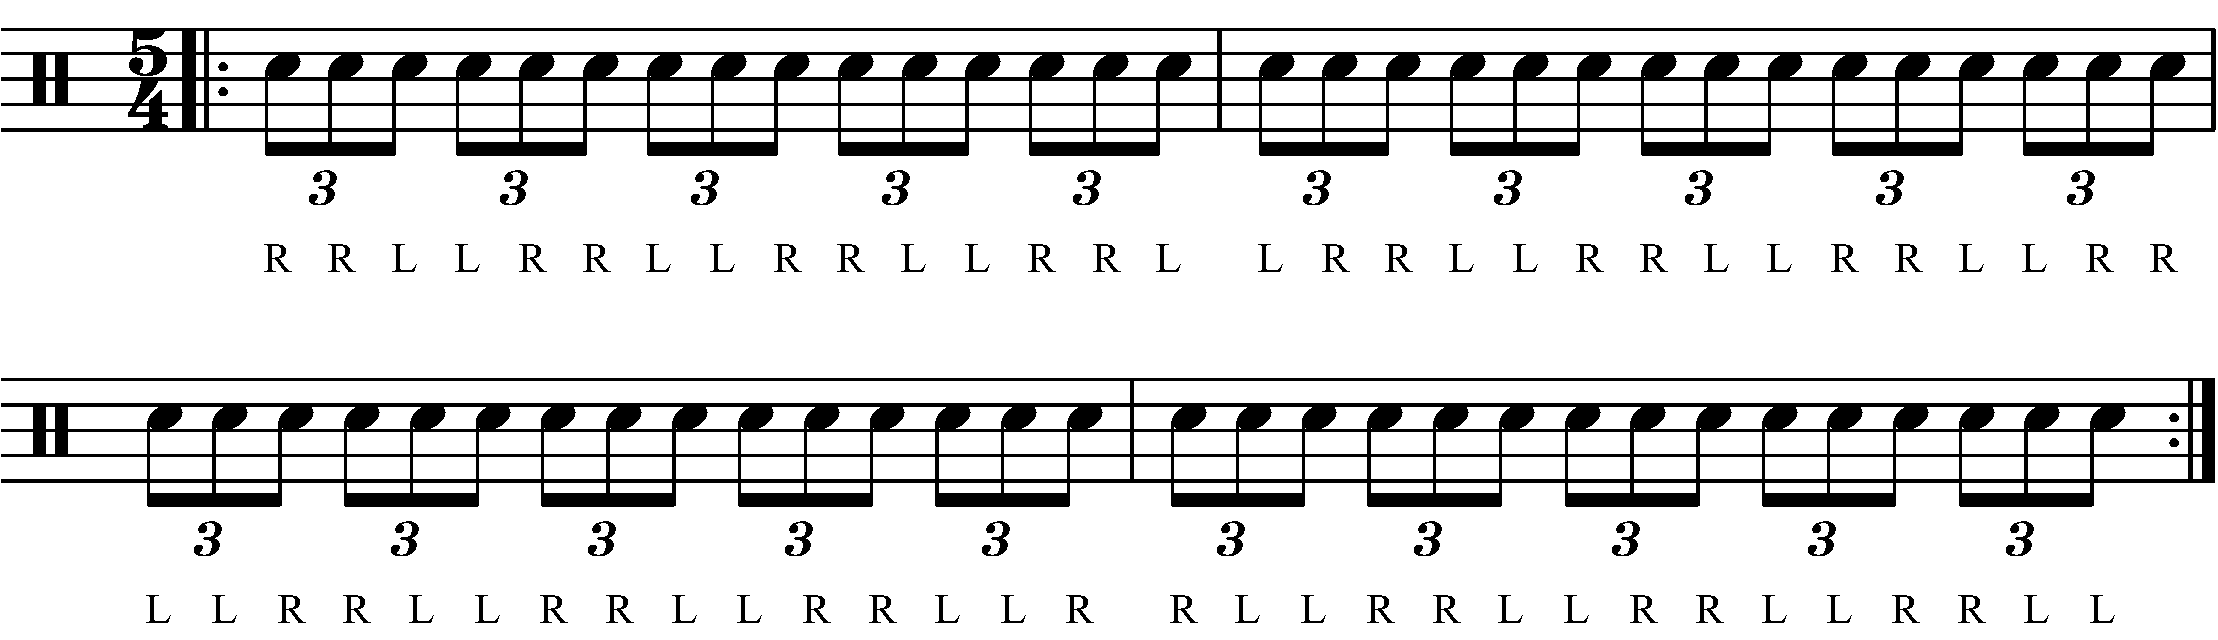 A double stroke triplet in 5/4 with standard sticking